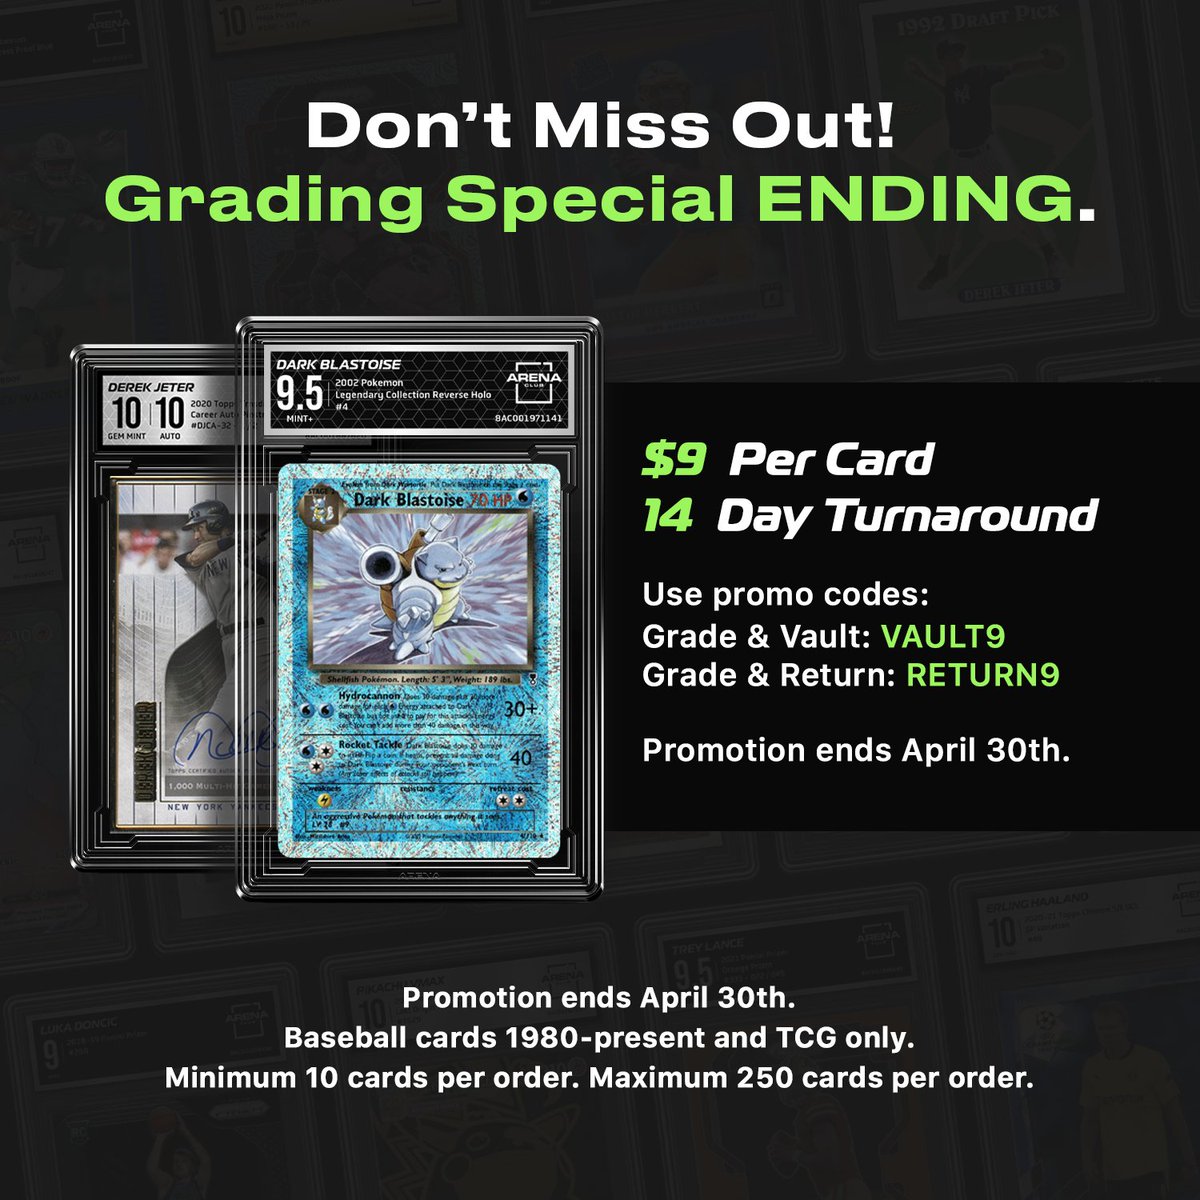 Superior grading for only $9 with a 14-day turnaround time. No Upcharges. Precise, premium grading with full report. 📝 🔥 Use promo codes: Grade & Vault: VAULT9 Grade & Return: RETURN9 Act Now! Promotion ends April 30th ⏰ Baseball cards 1980-present and TCG only.